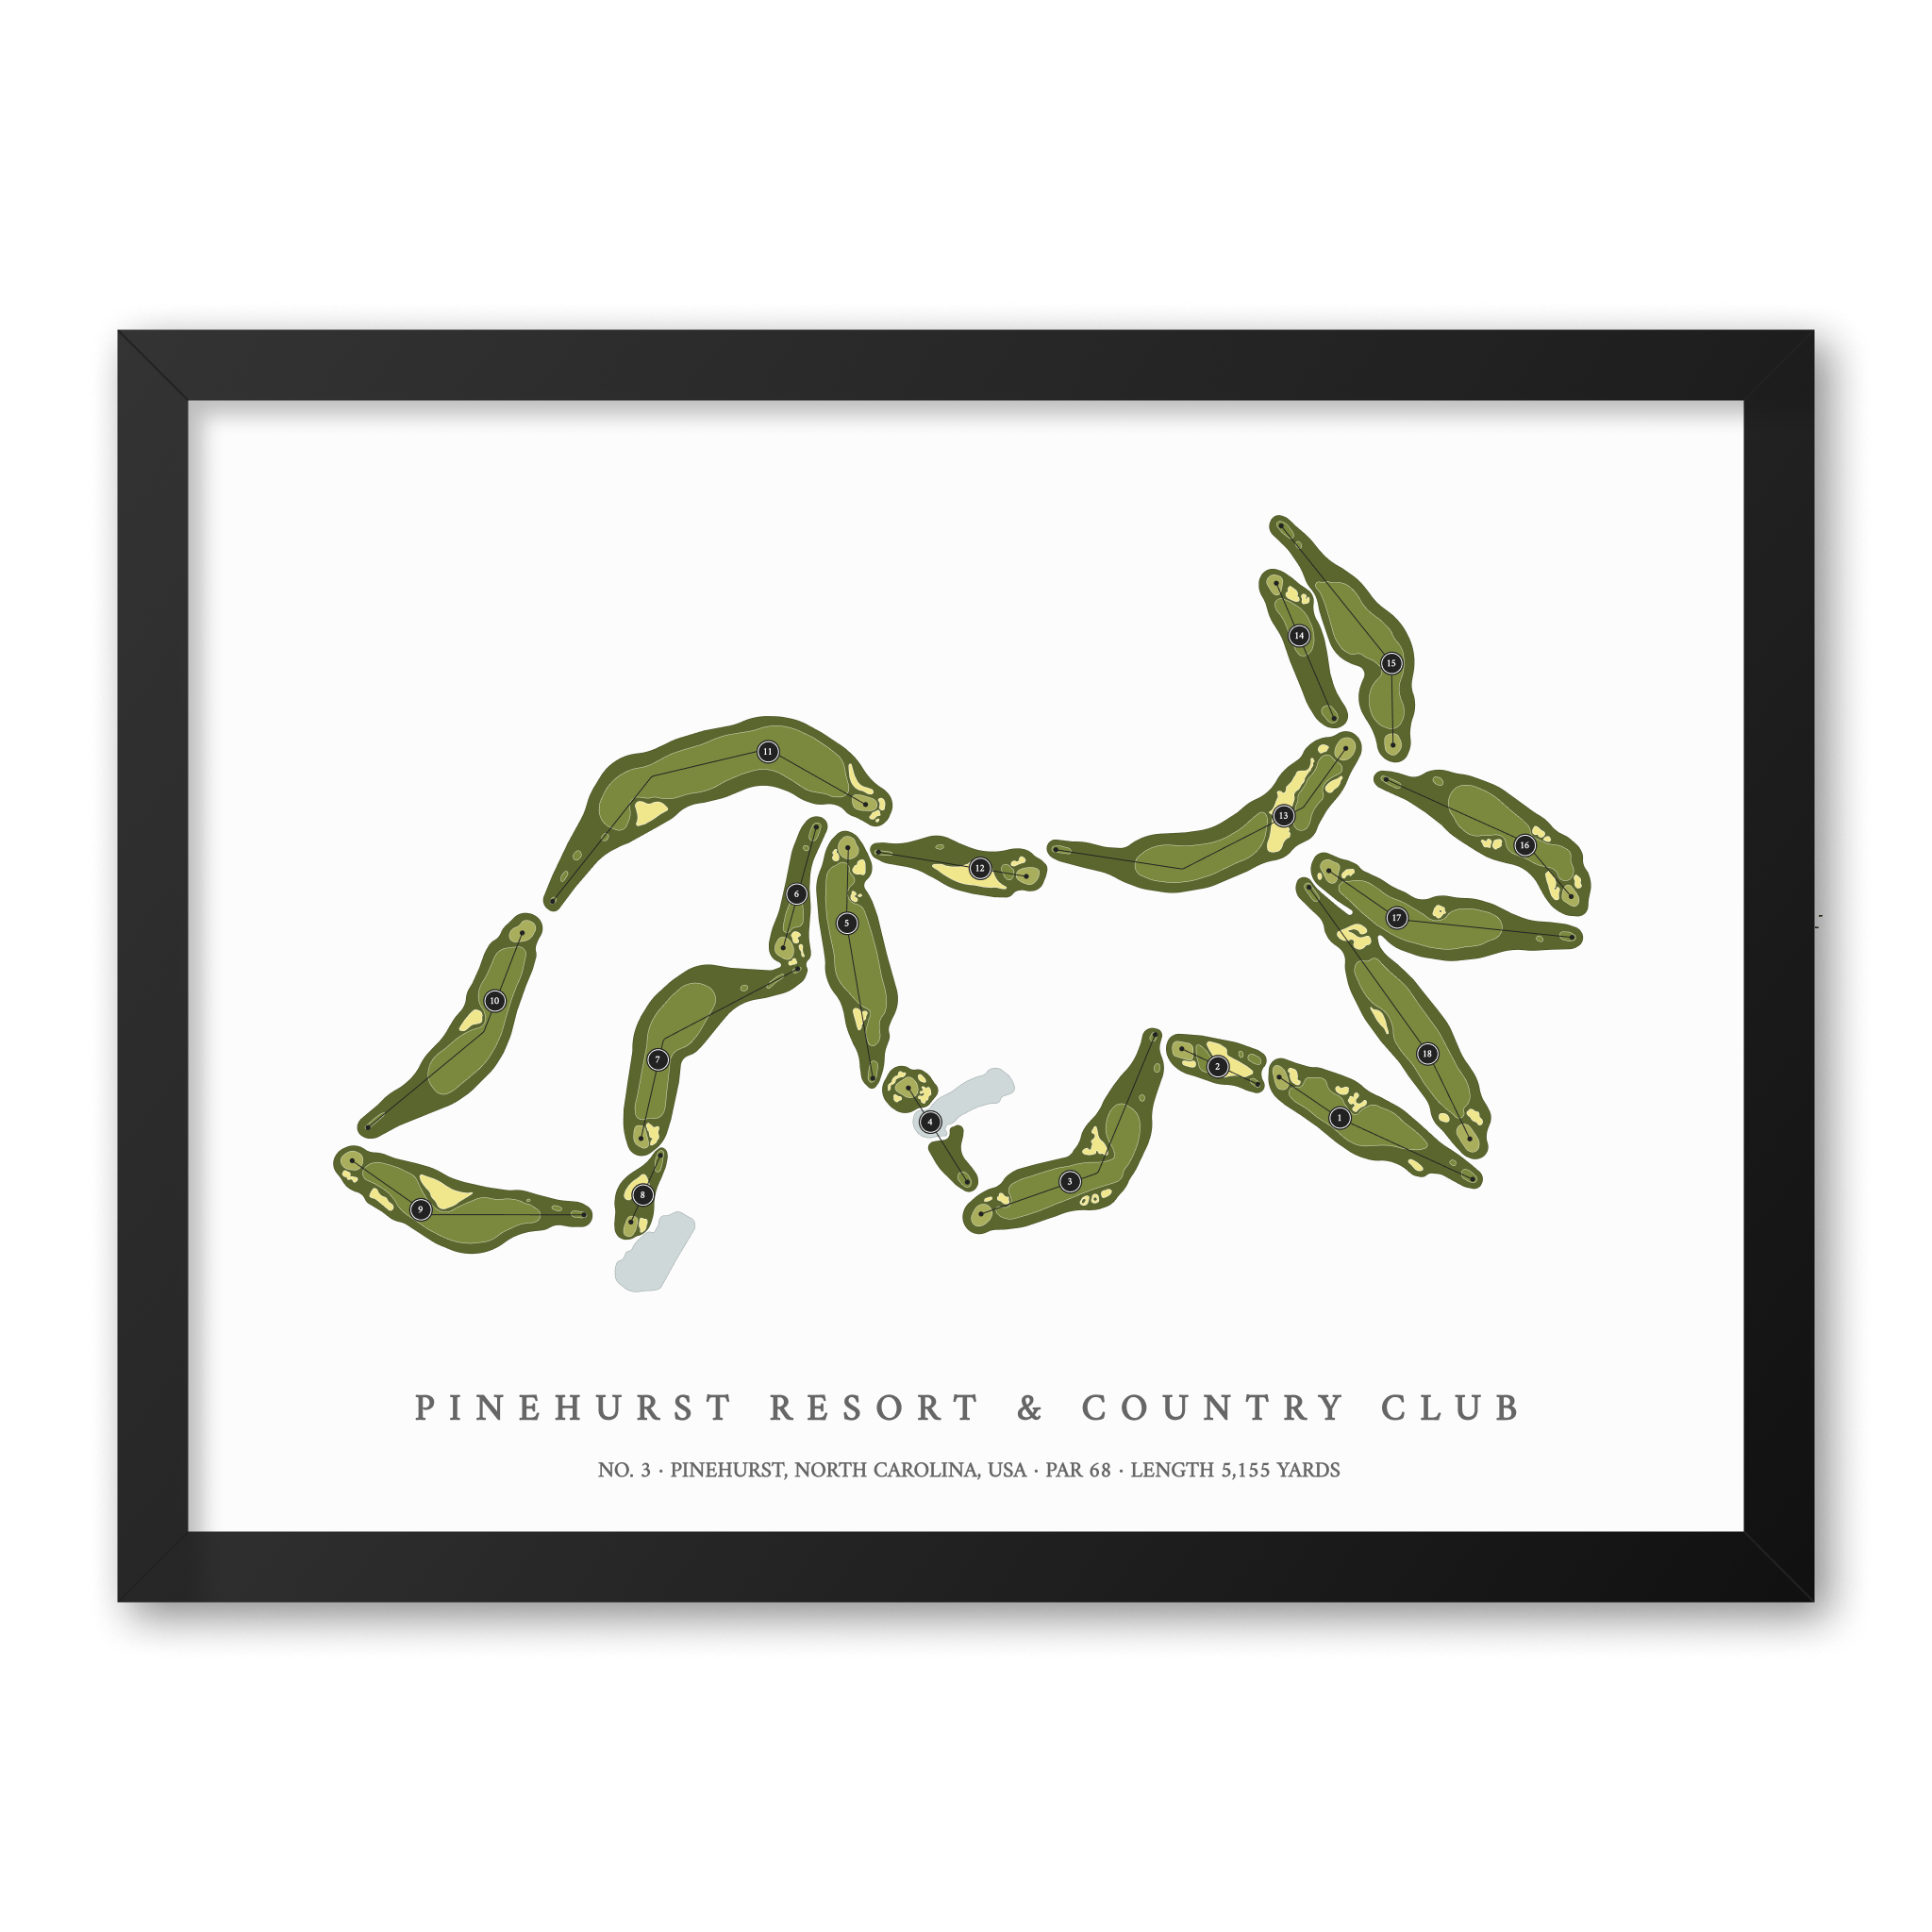 Pinehurst Resort & Country Club - No 3| Golf Course Print | Black Frame With Hole Numbers #hole numbers_yes